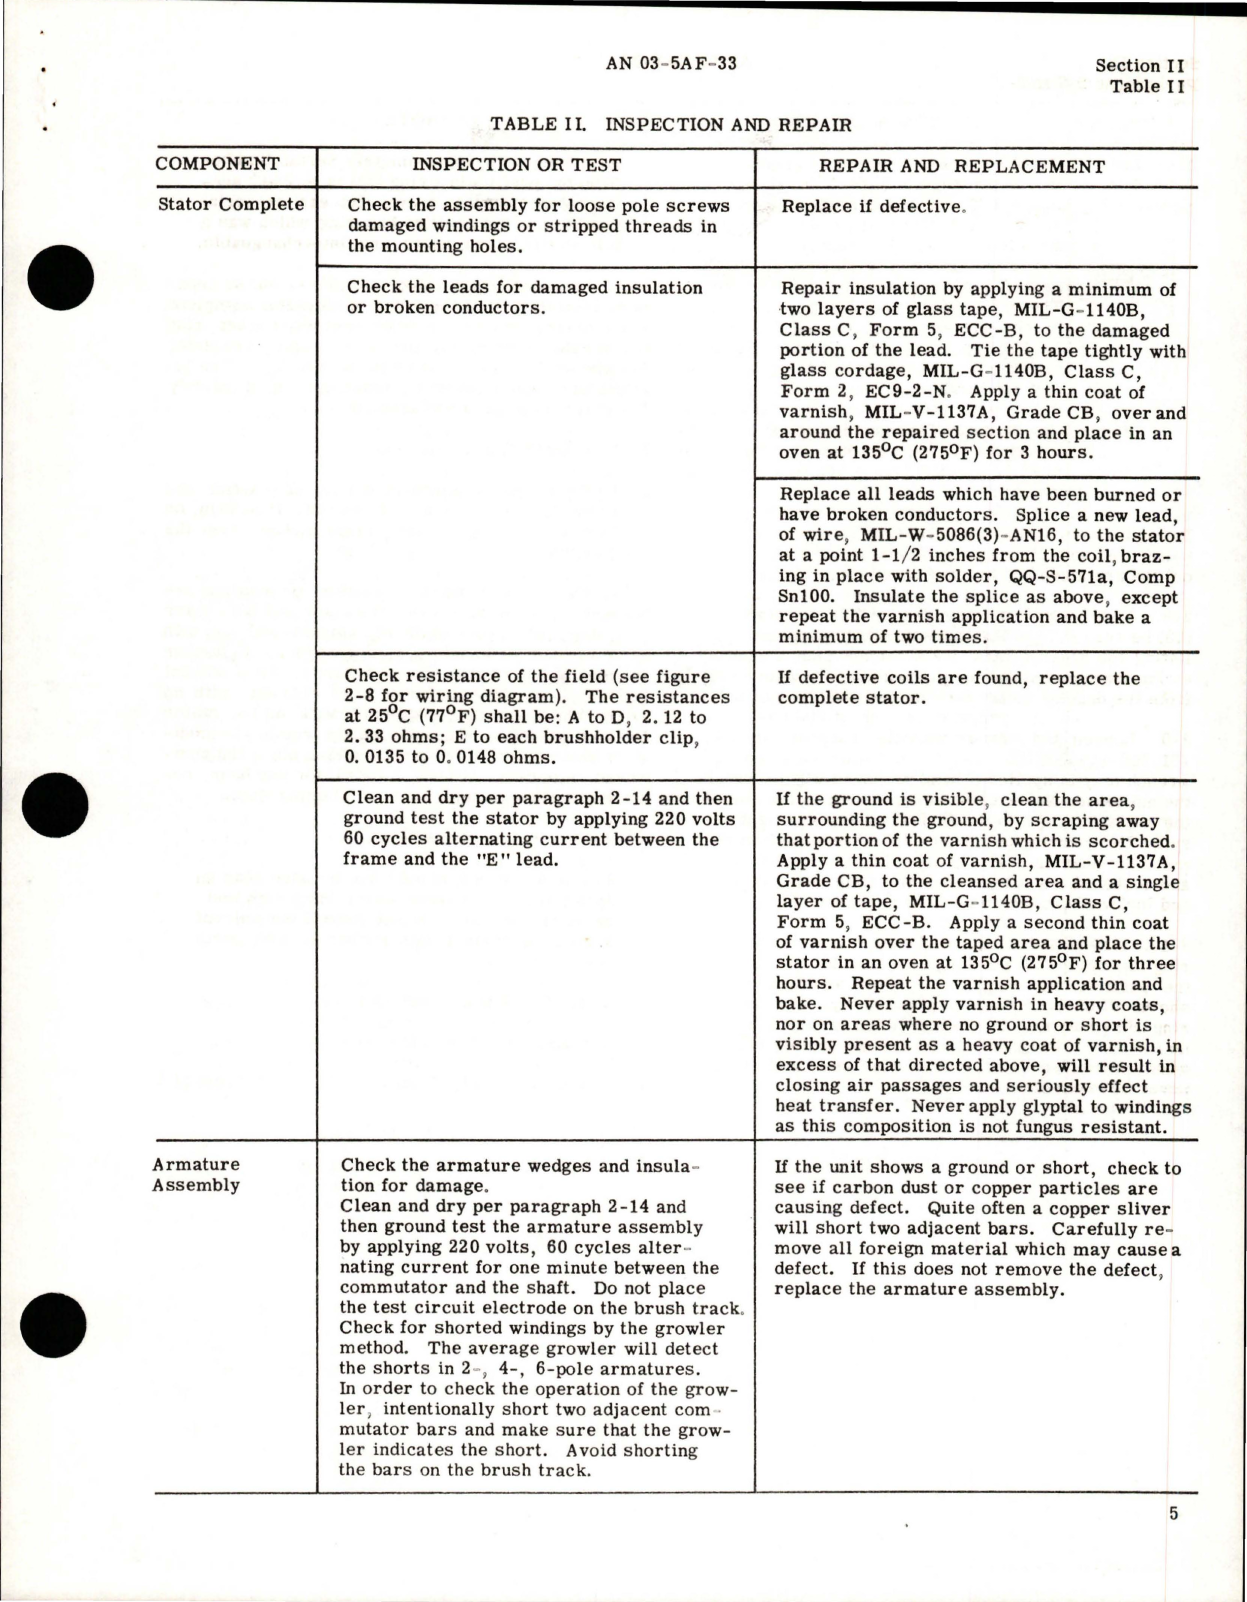 Sample page 7 from AirCorps Library document: Overhaul Instructions for DC Generator - Part A28A85841, AN 3633-1, A35A9103 and A45J247